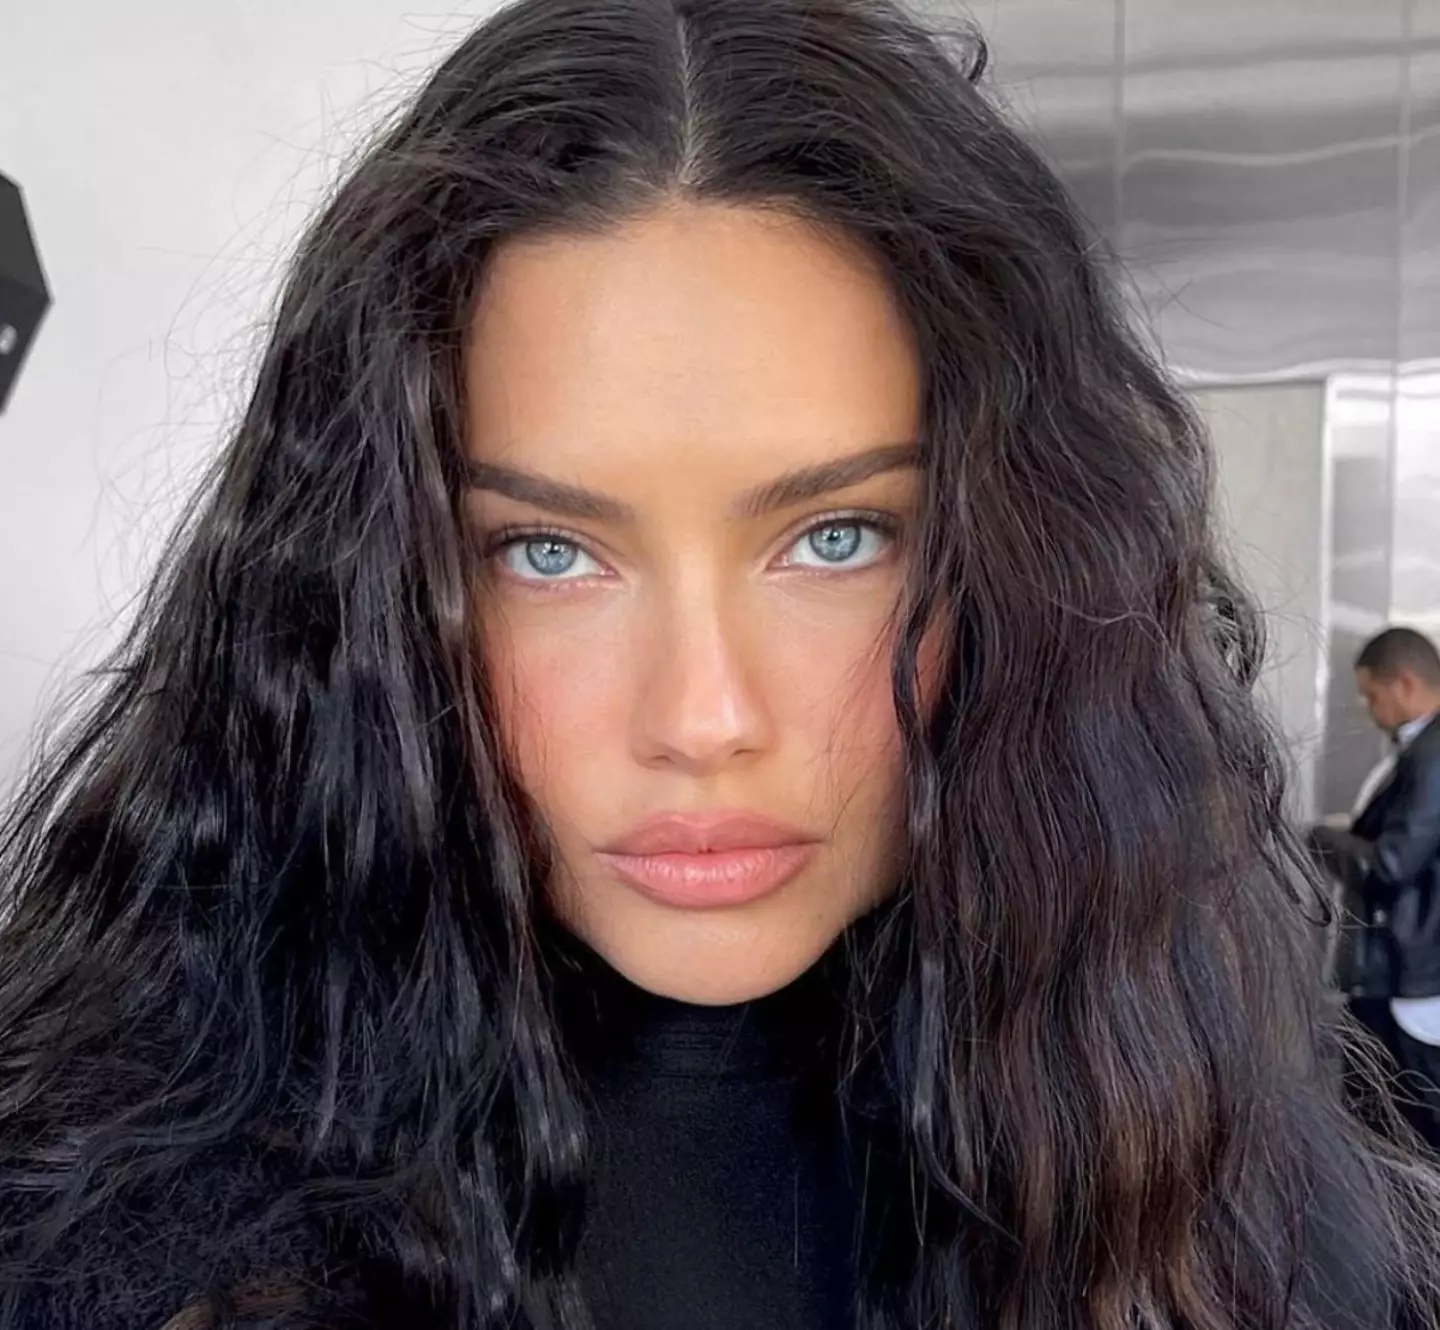 Adriana Lima is best known for being a Victoria's Secret Angel, a position she held between 1999 and 2018.